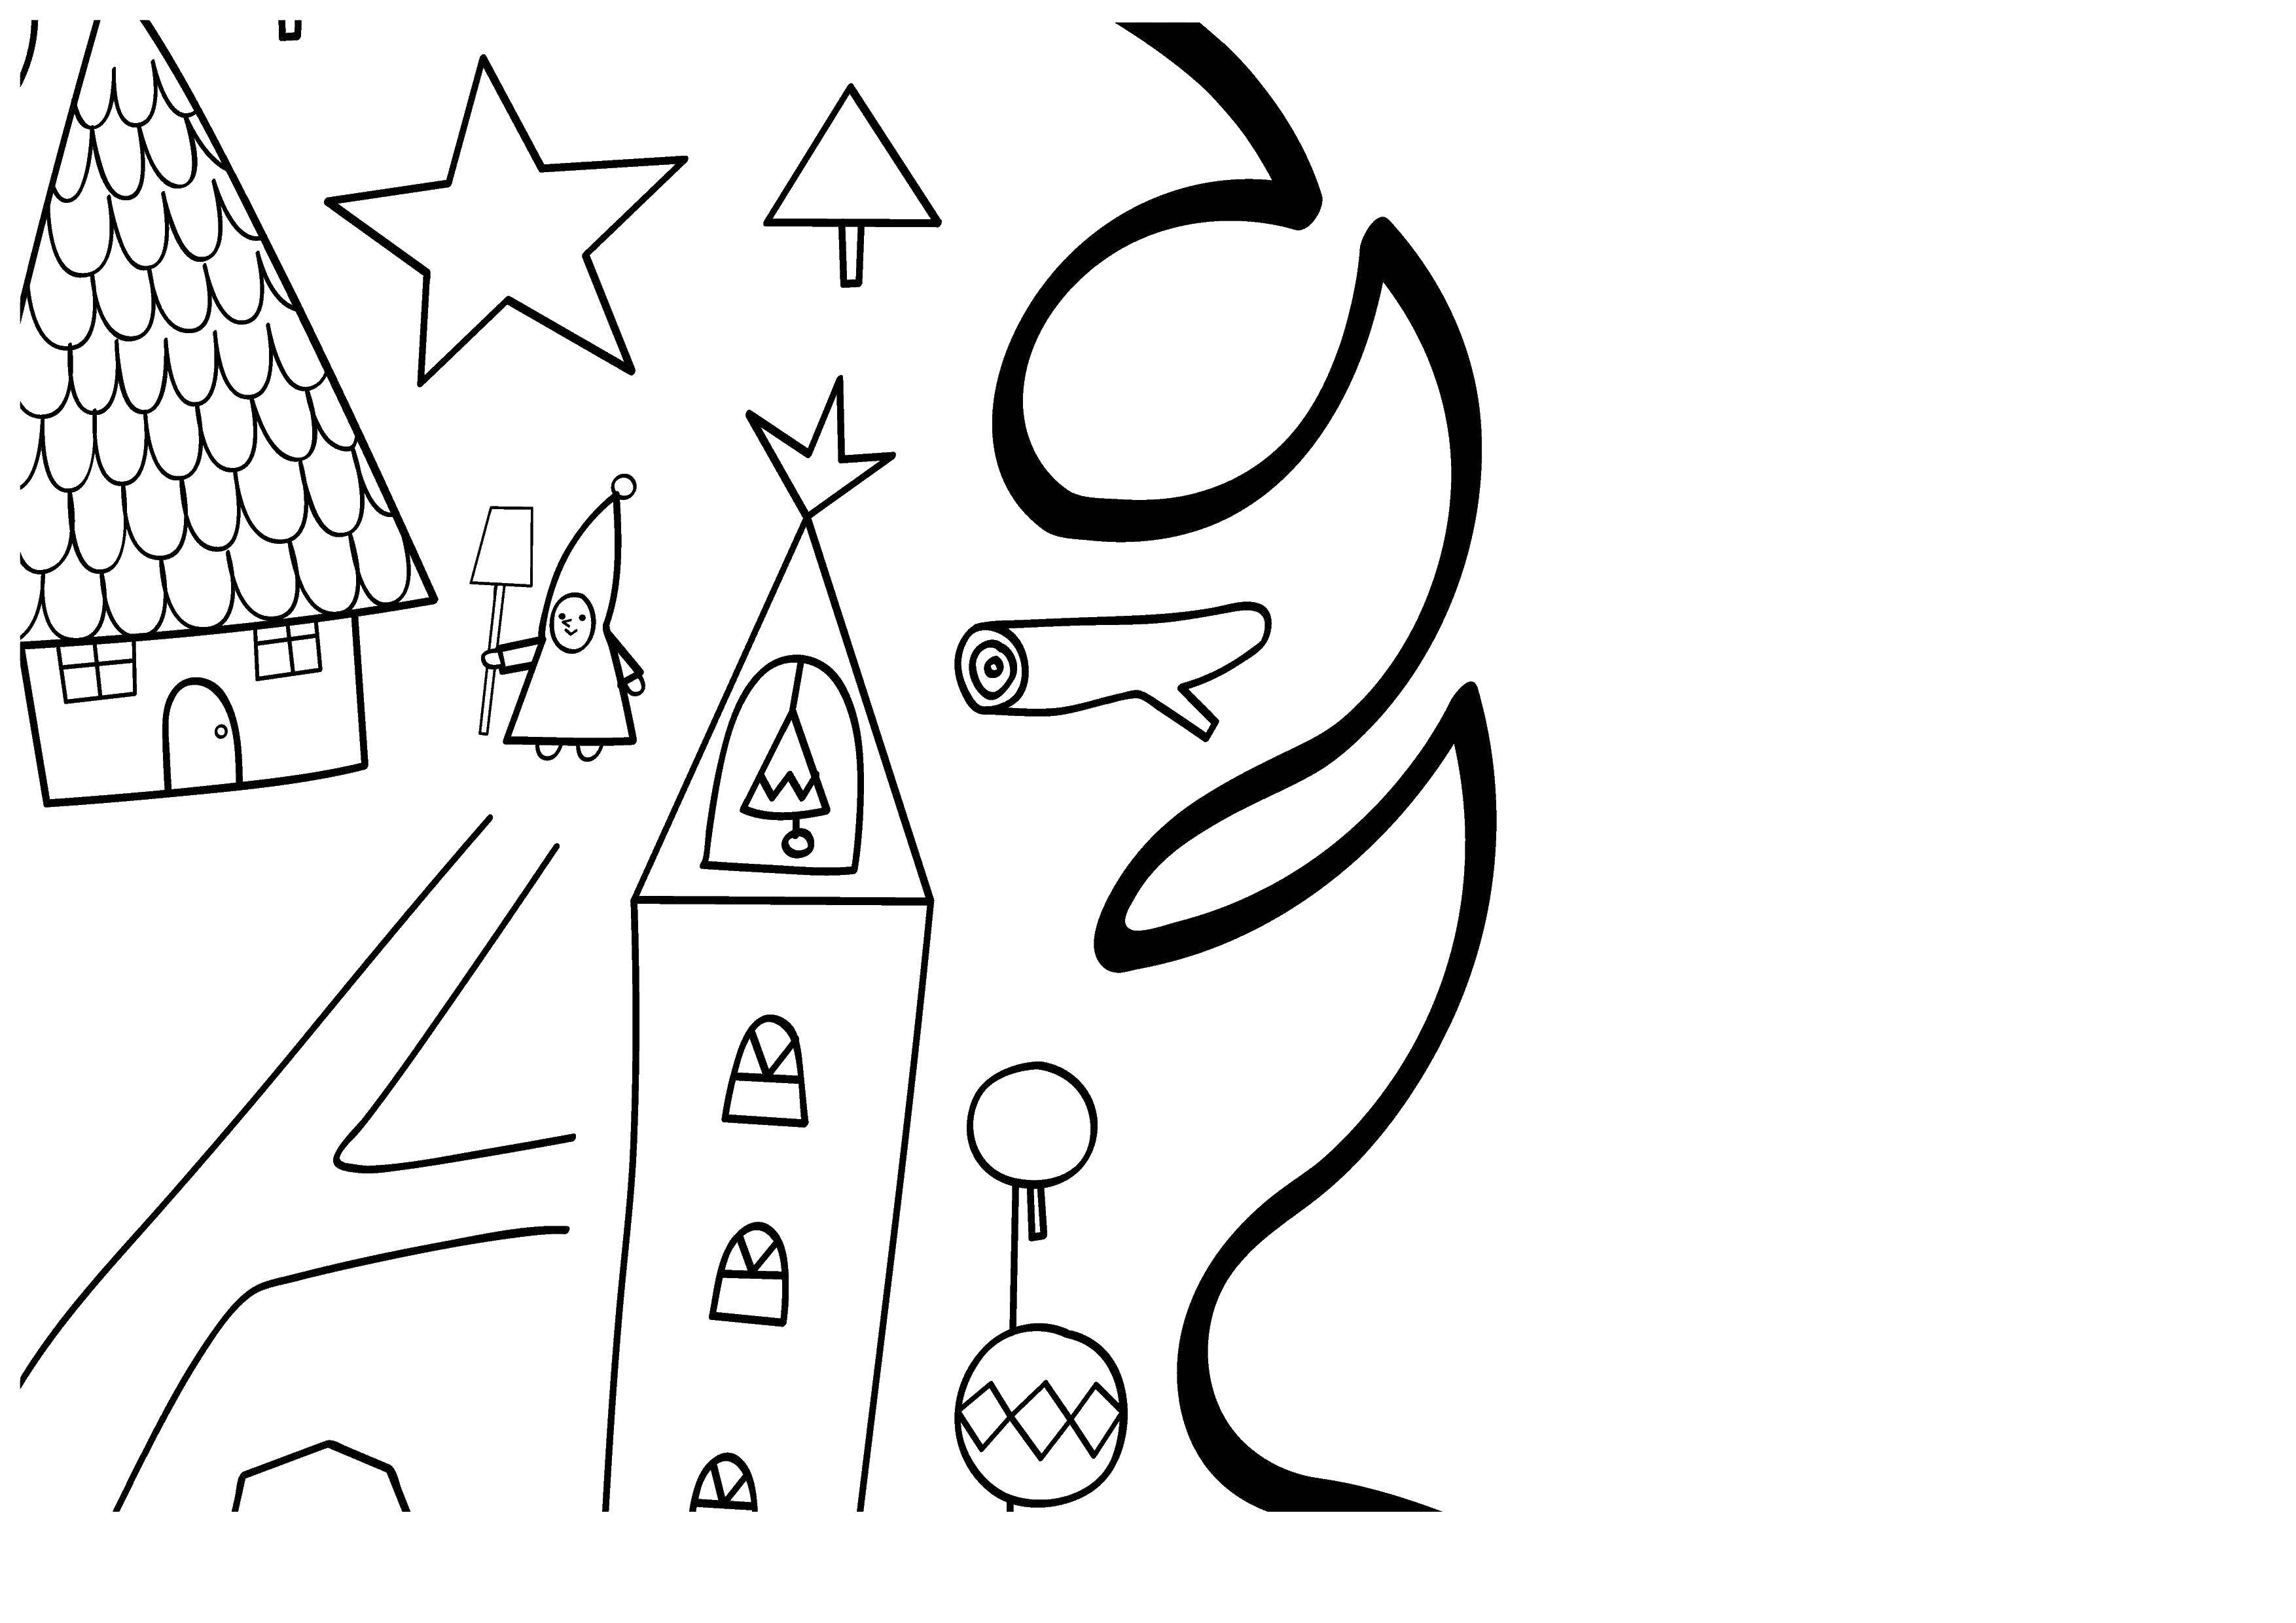 Coloring Star. Category Coloring pages for kids. Tags:  star, house, bell tower.